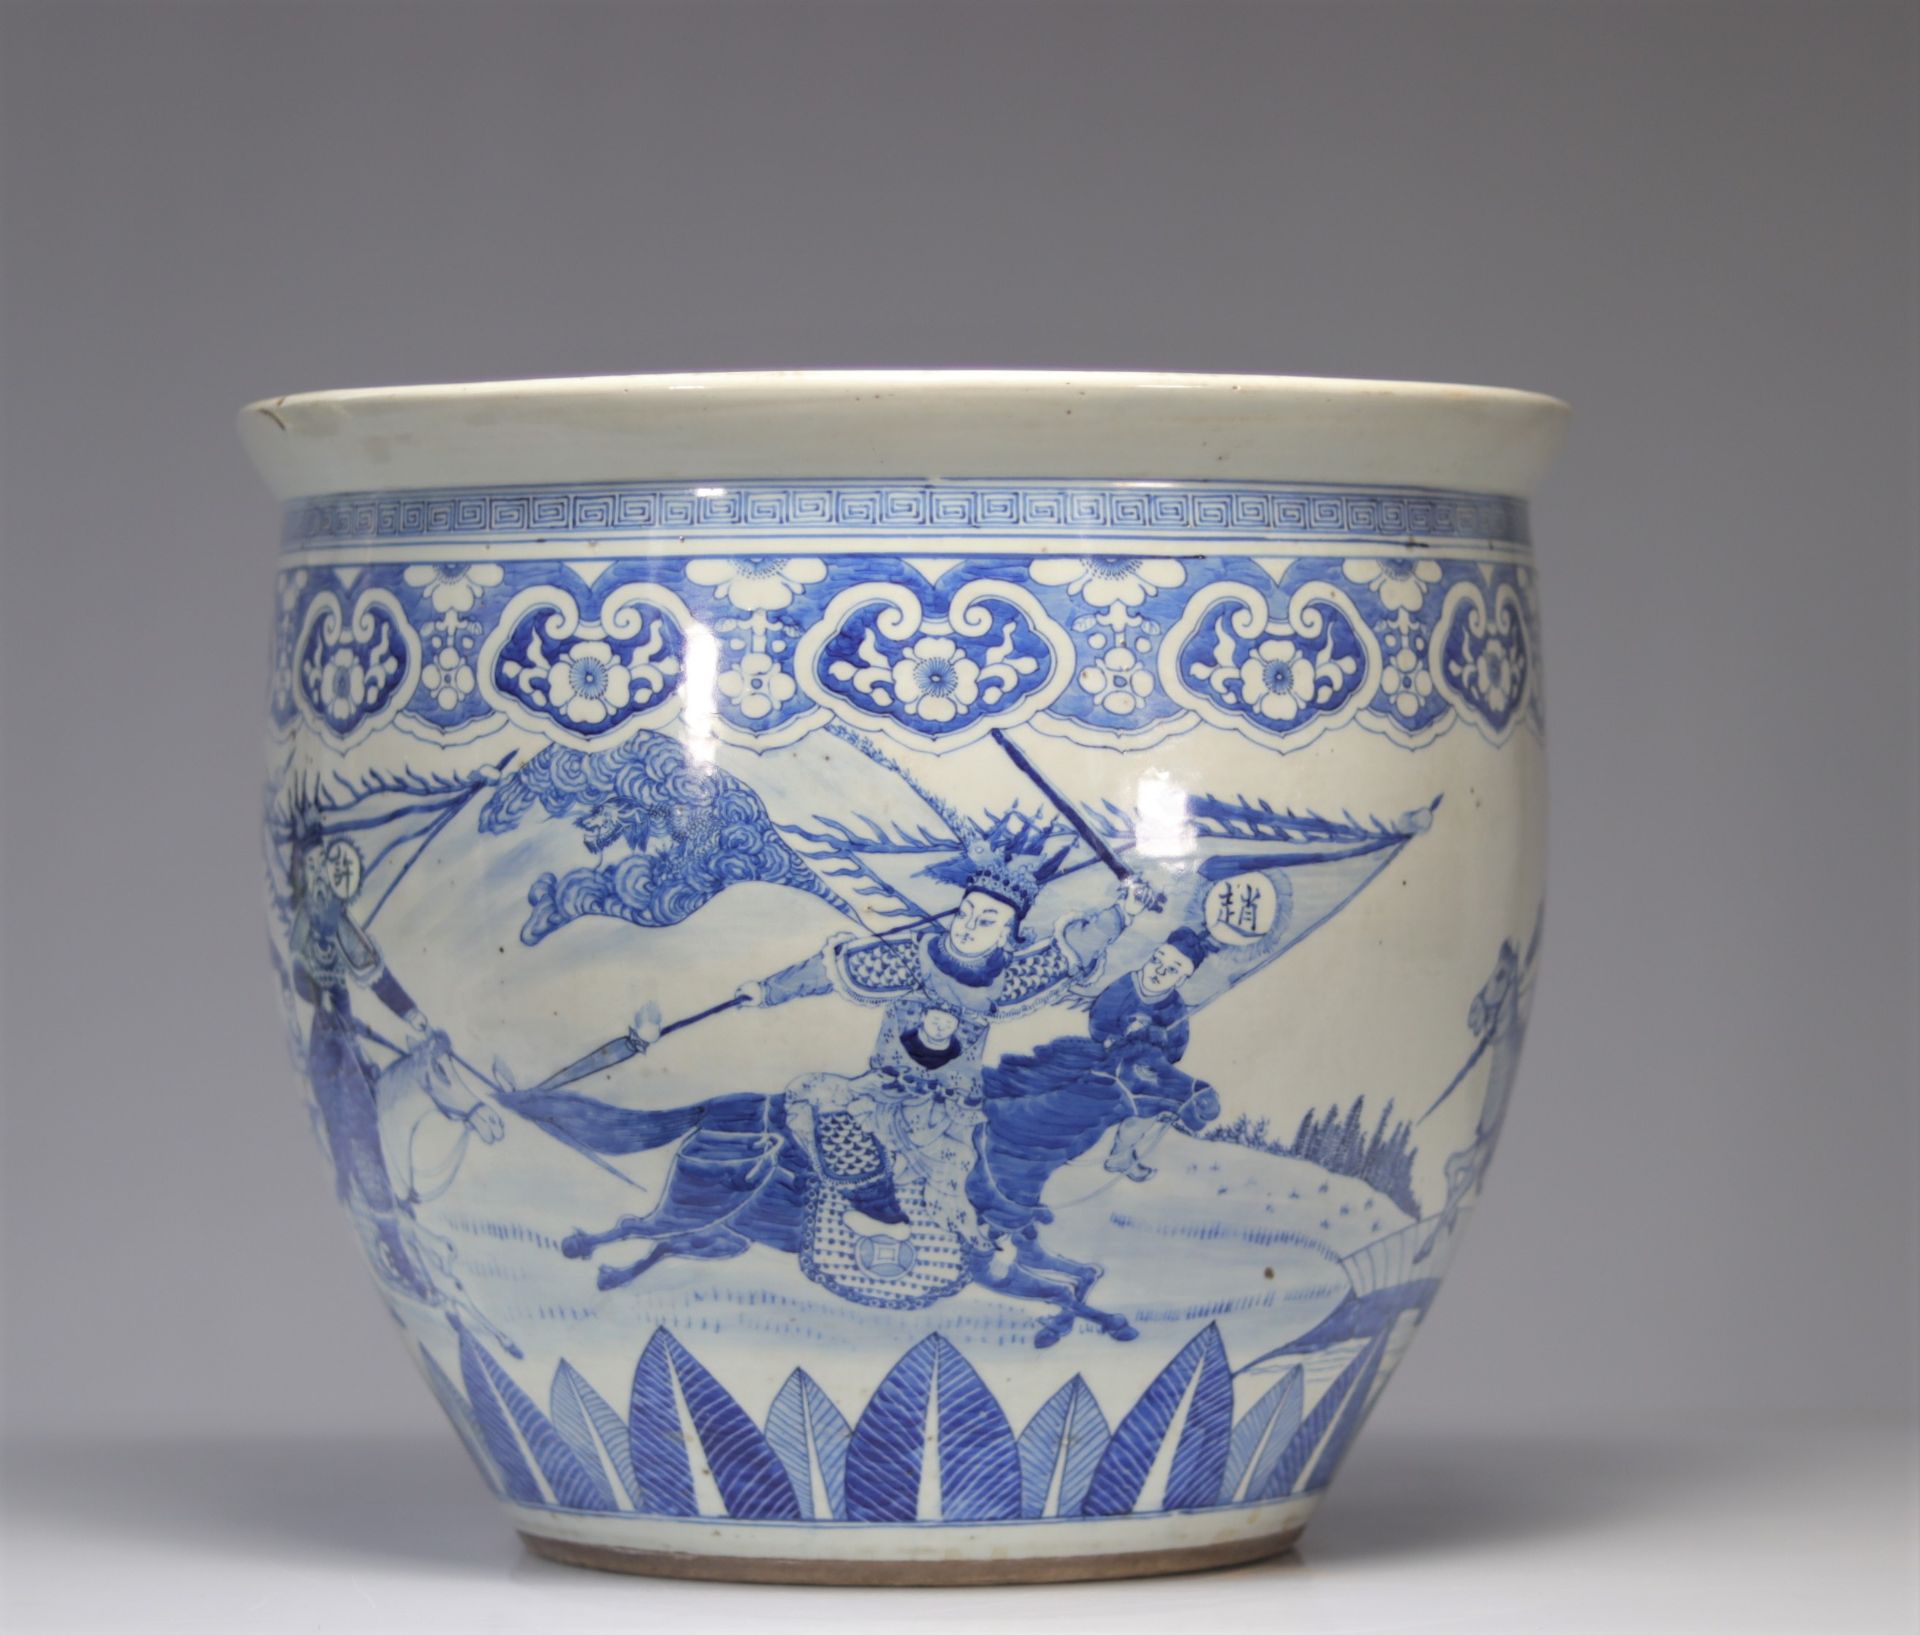 Imposing blue-white porcelain vase decorated with Qing period warriors - Image 2 of 6